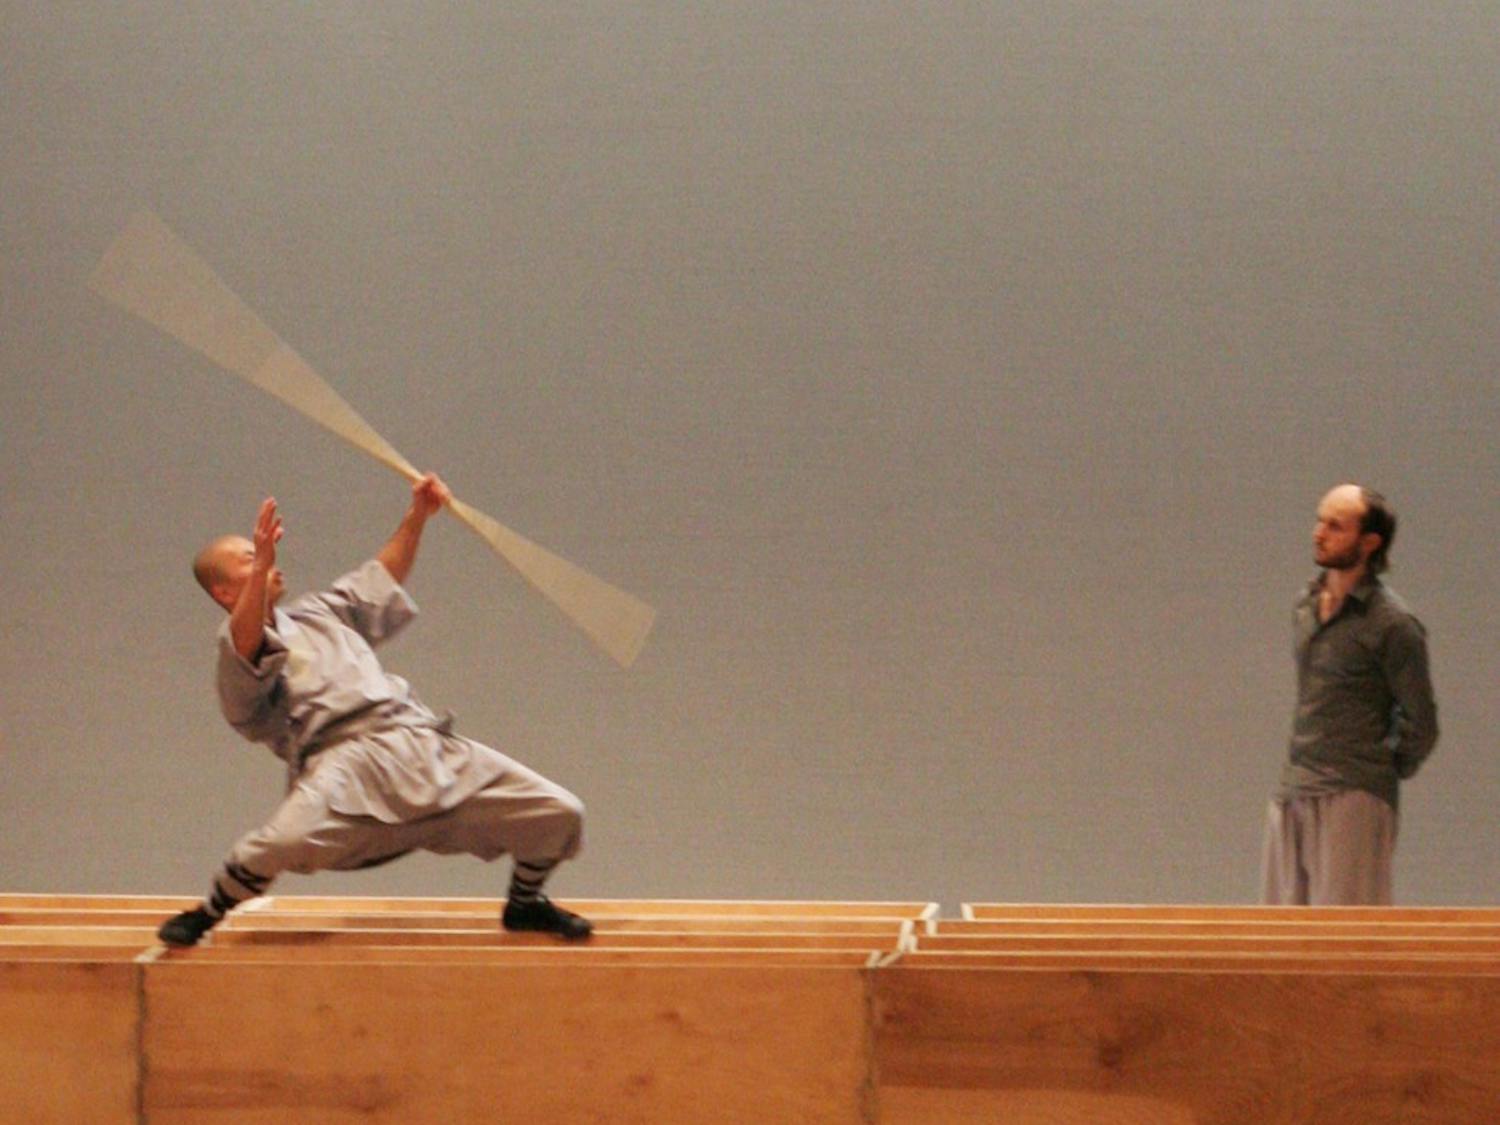 A cast member for Sutra performs at Memorial Hall, one of the group’s two stops in the United States. There was a diverse selection of shows at Memorial Hall this fall including the Silk Road Ensemble with Yo-Yo Ma.